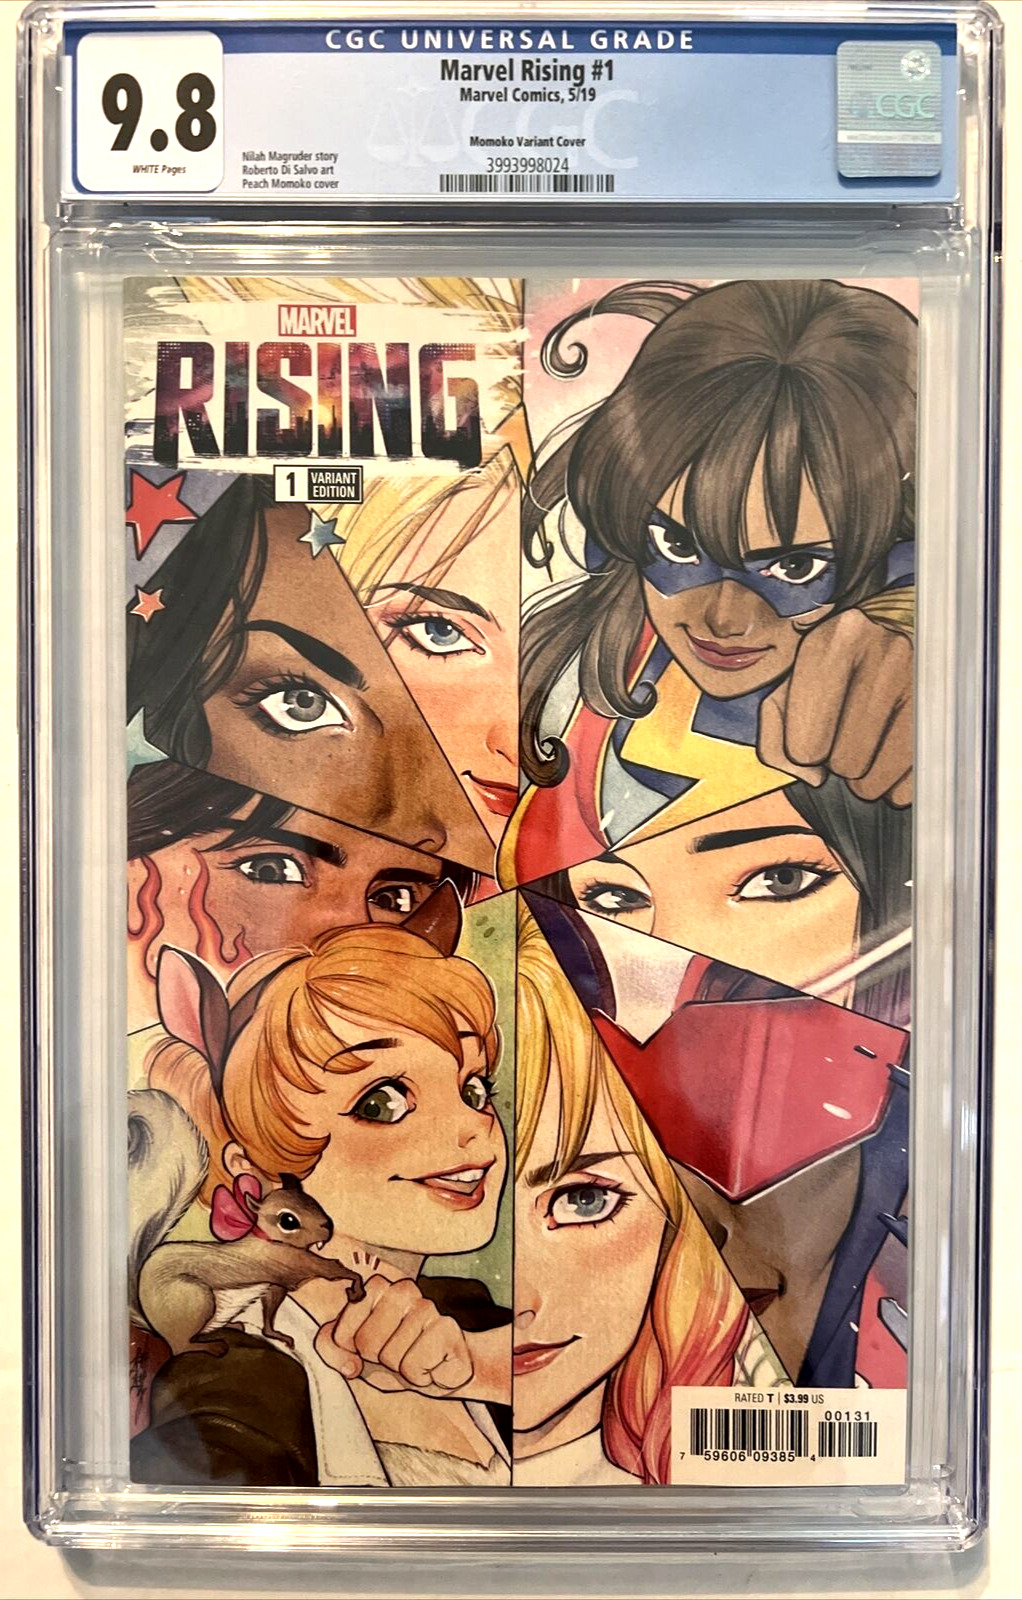 MARVEL RISING #1 CGC 9.8 PEACH MOMOKO 1:25 VARIANT COVER 2019 WHITE PAGES